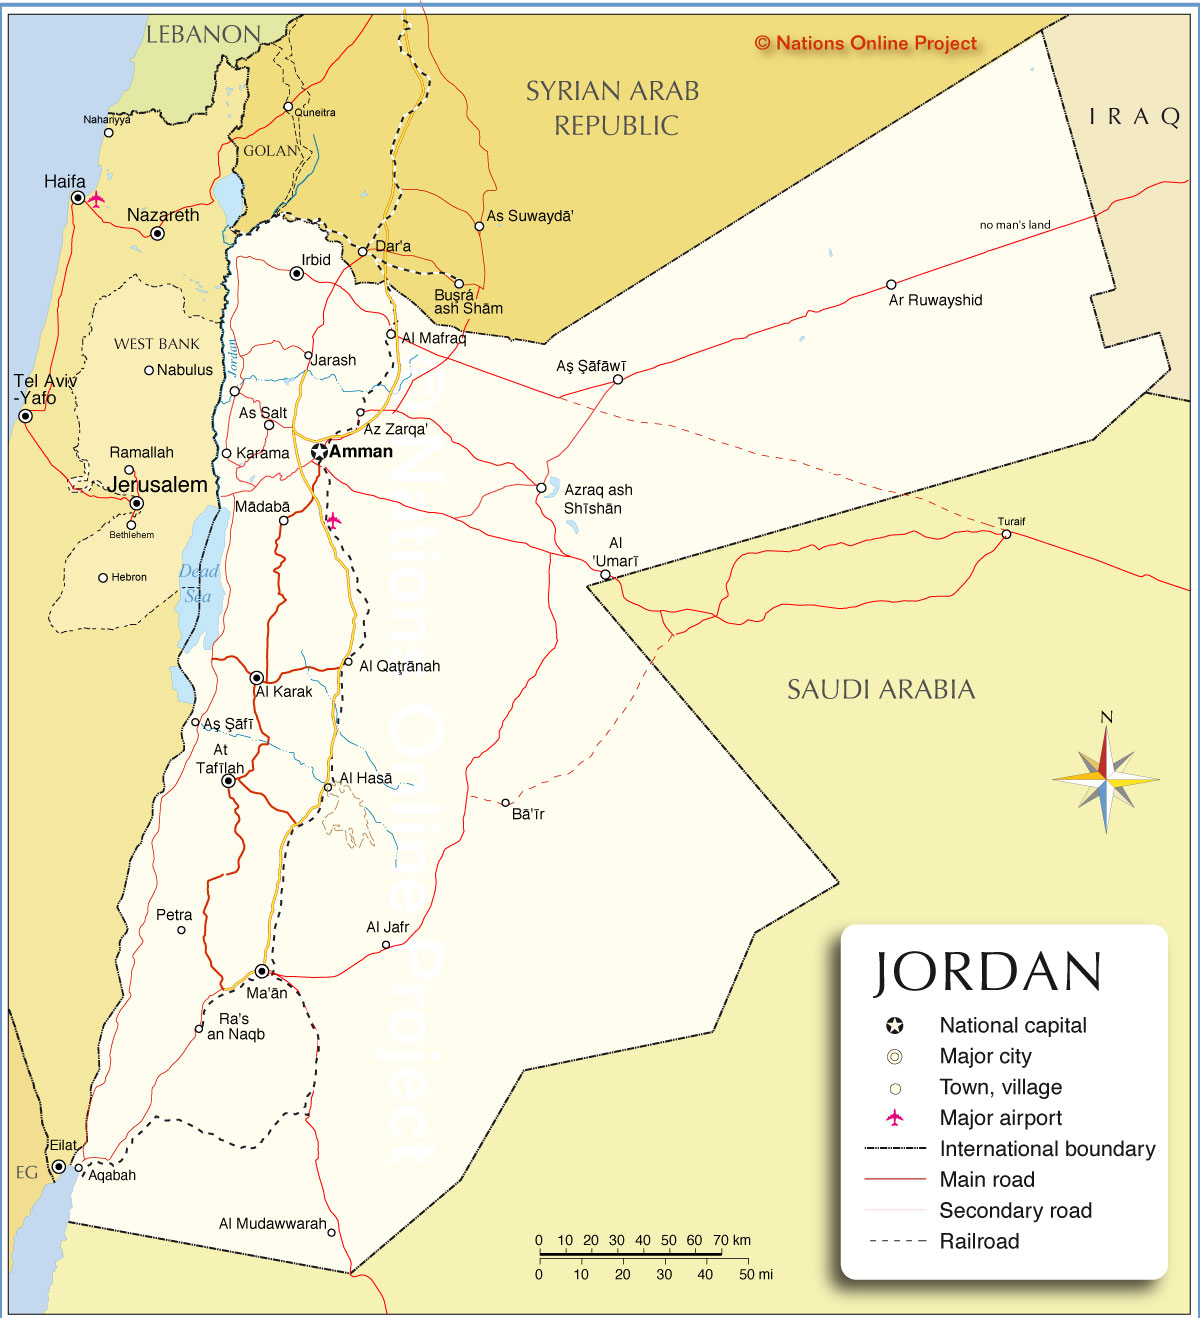 where is jordan located in the middle east